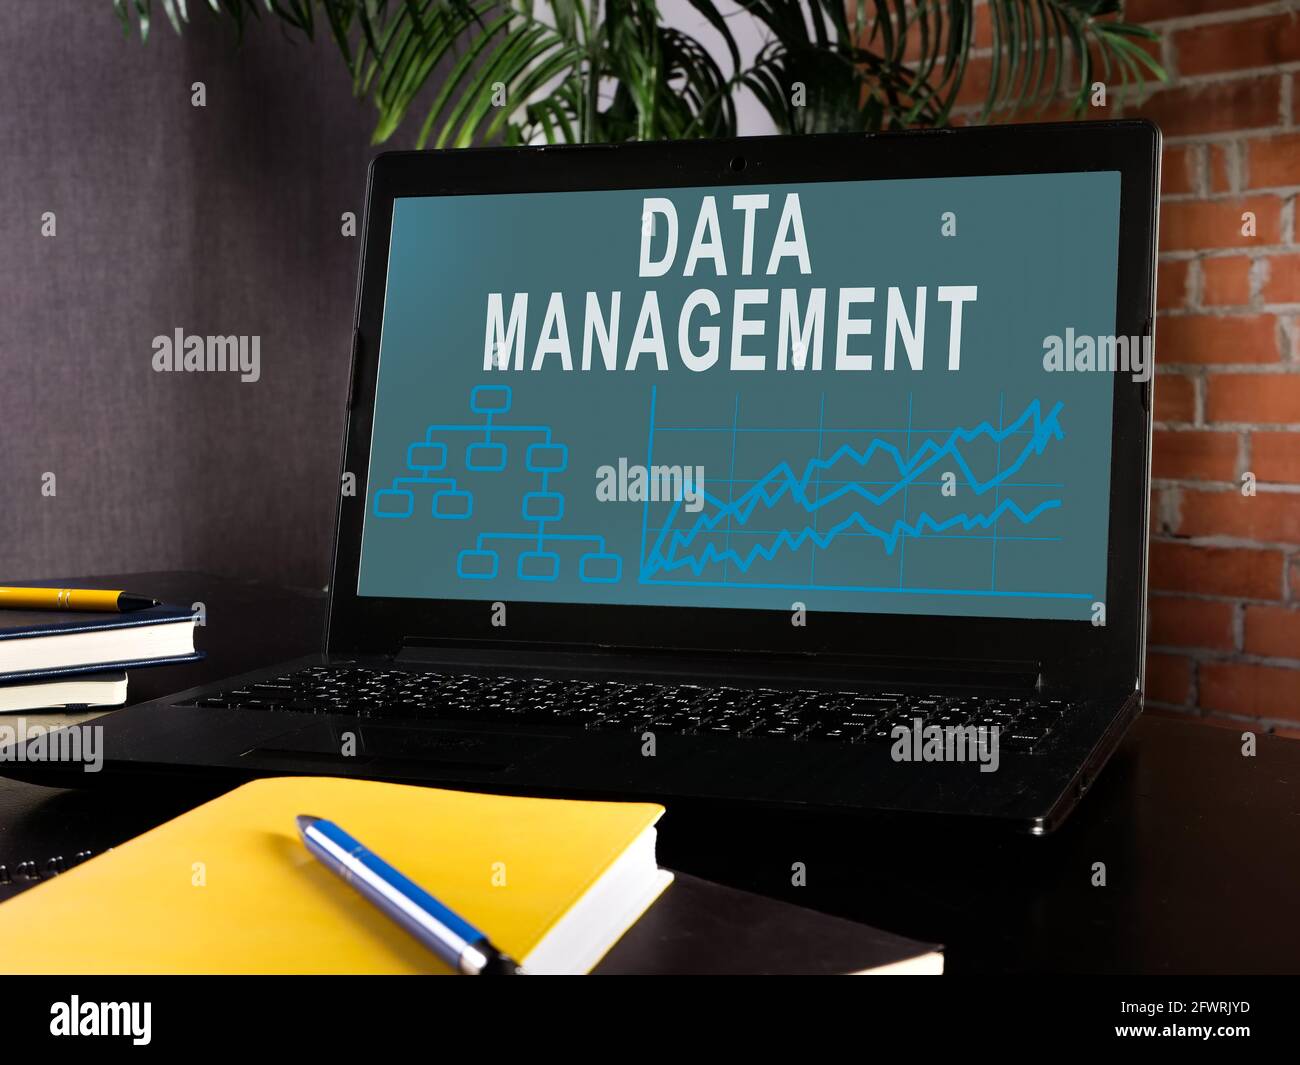 Data management info on the laptop screen. Stock Photo